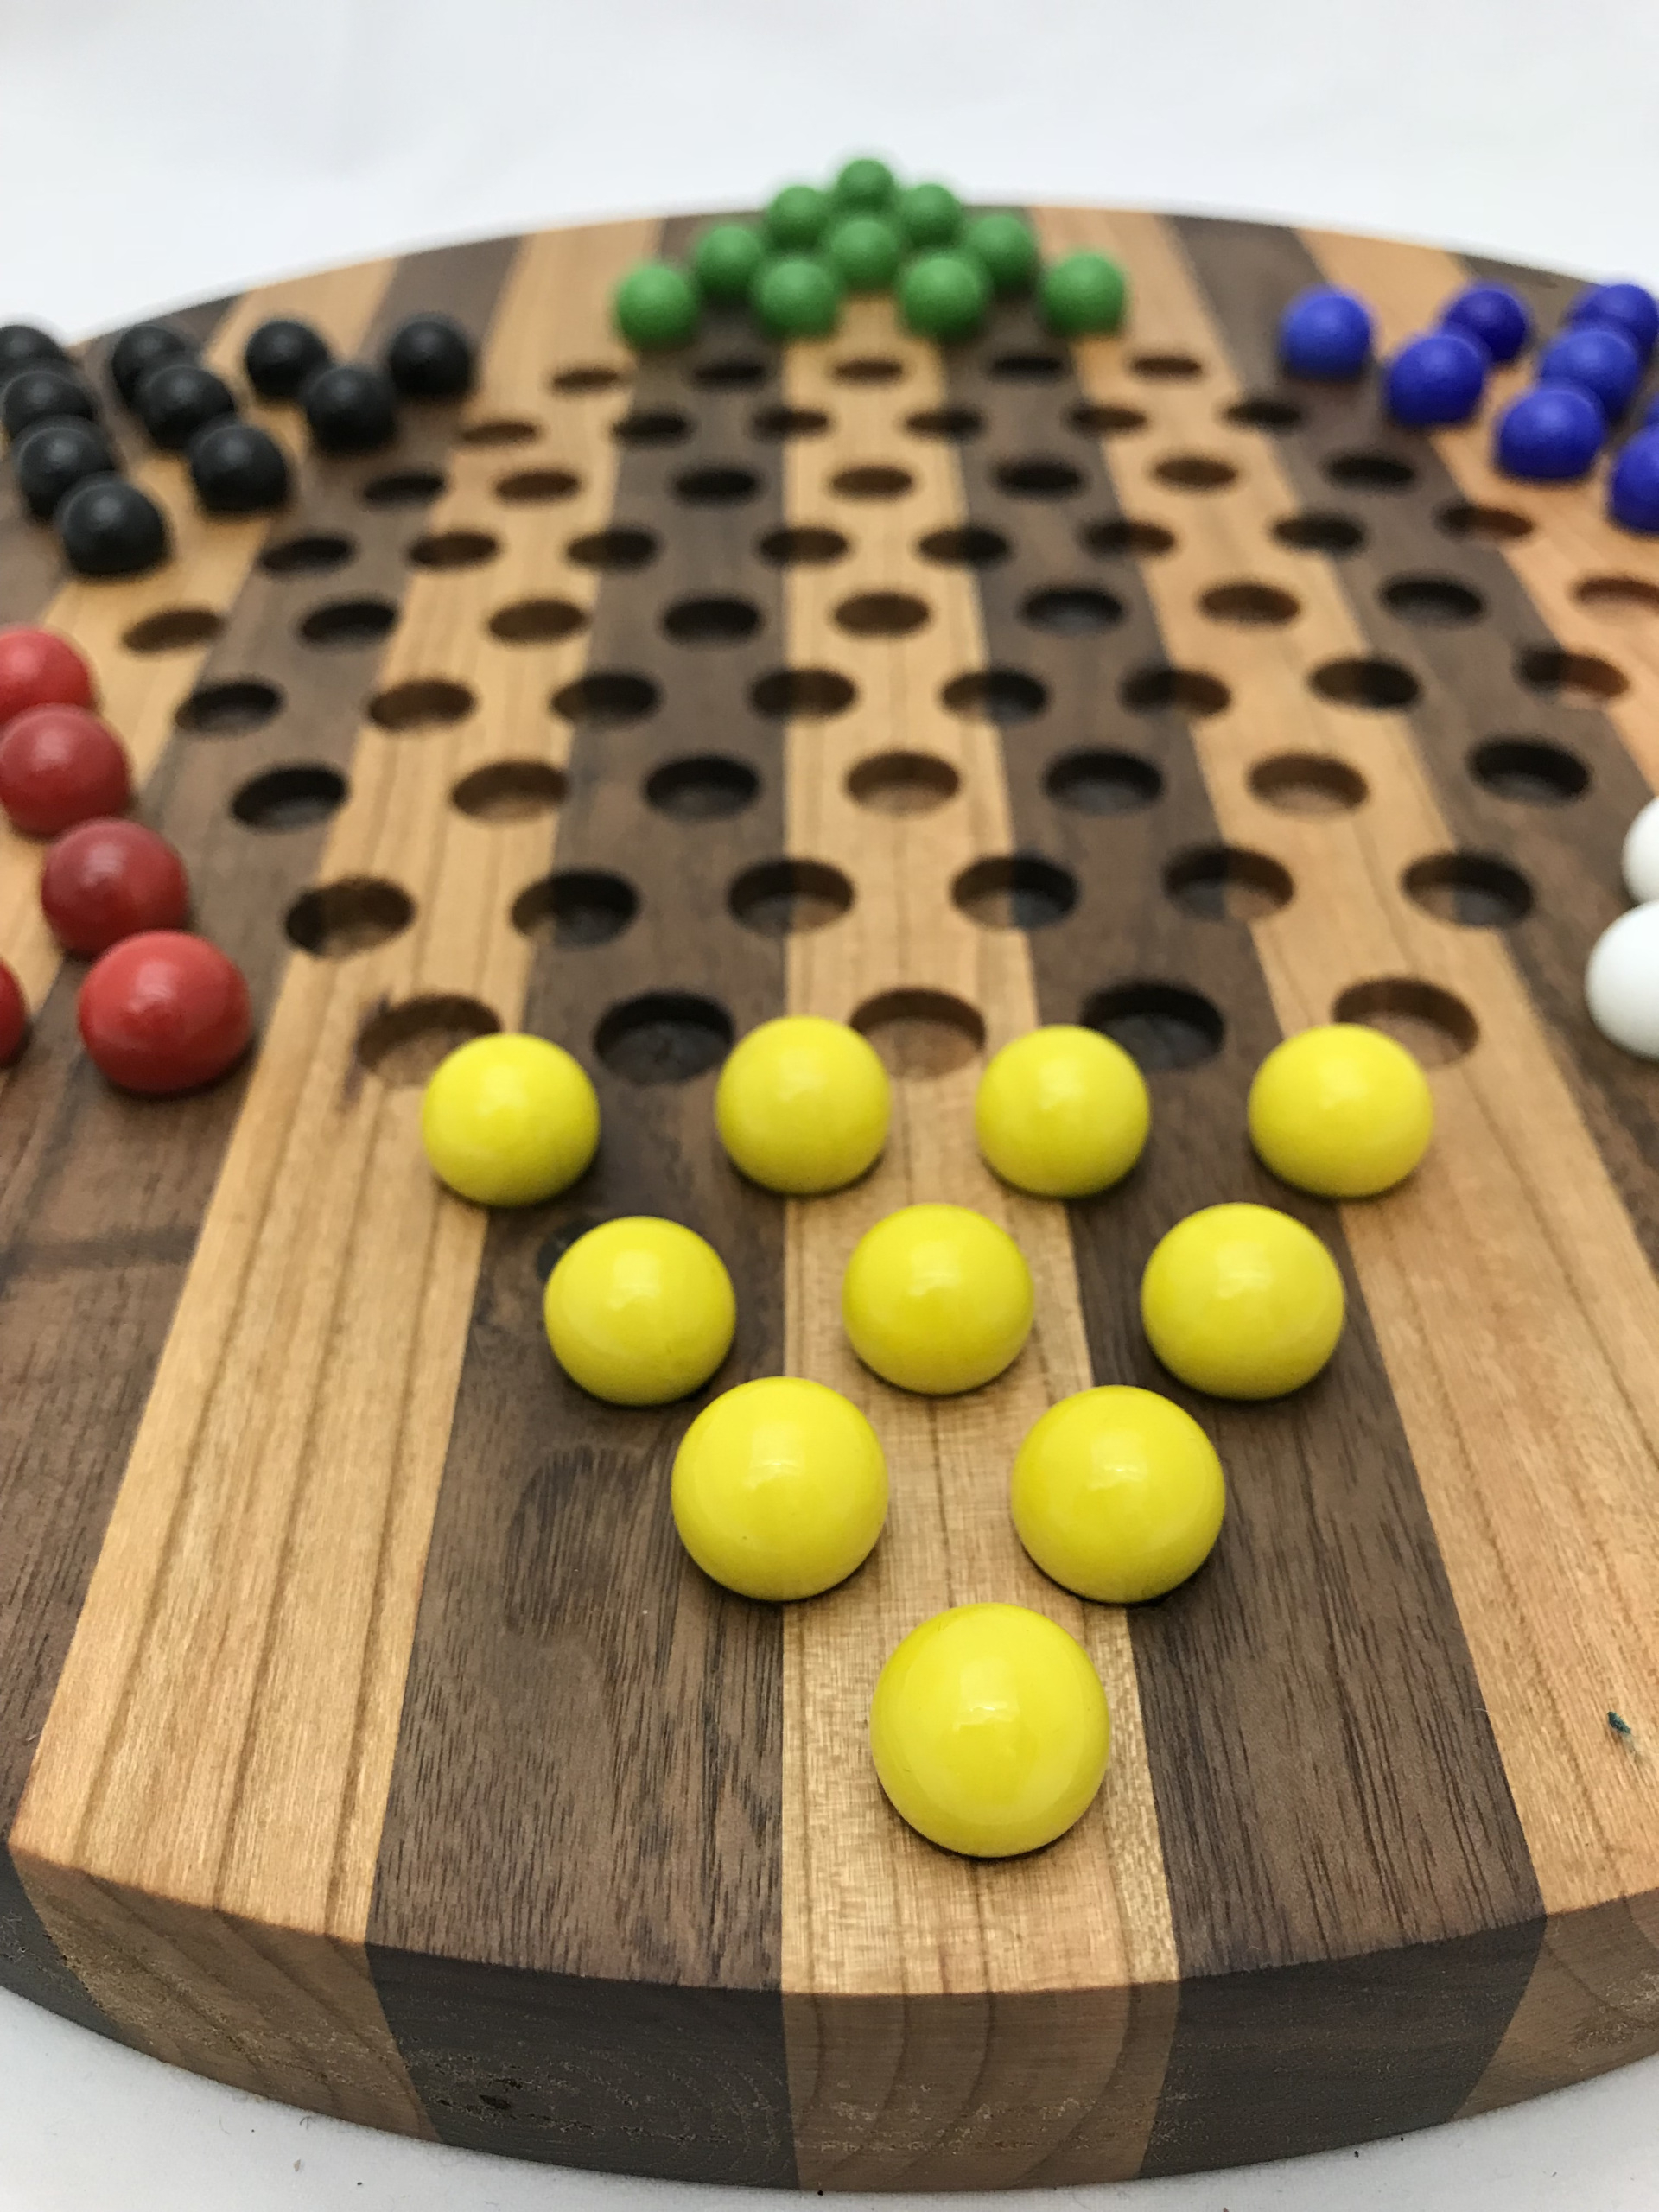 Marble Solitaire And Chinese Checkers